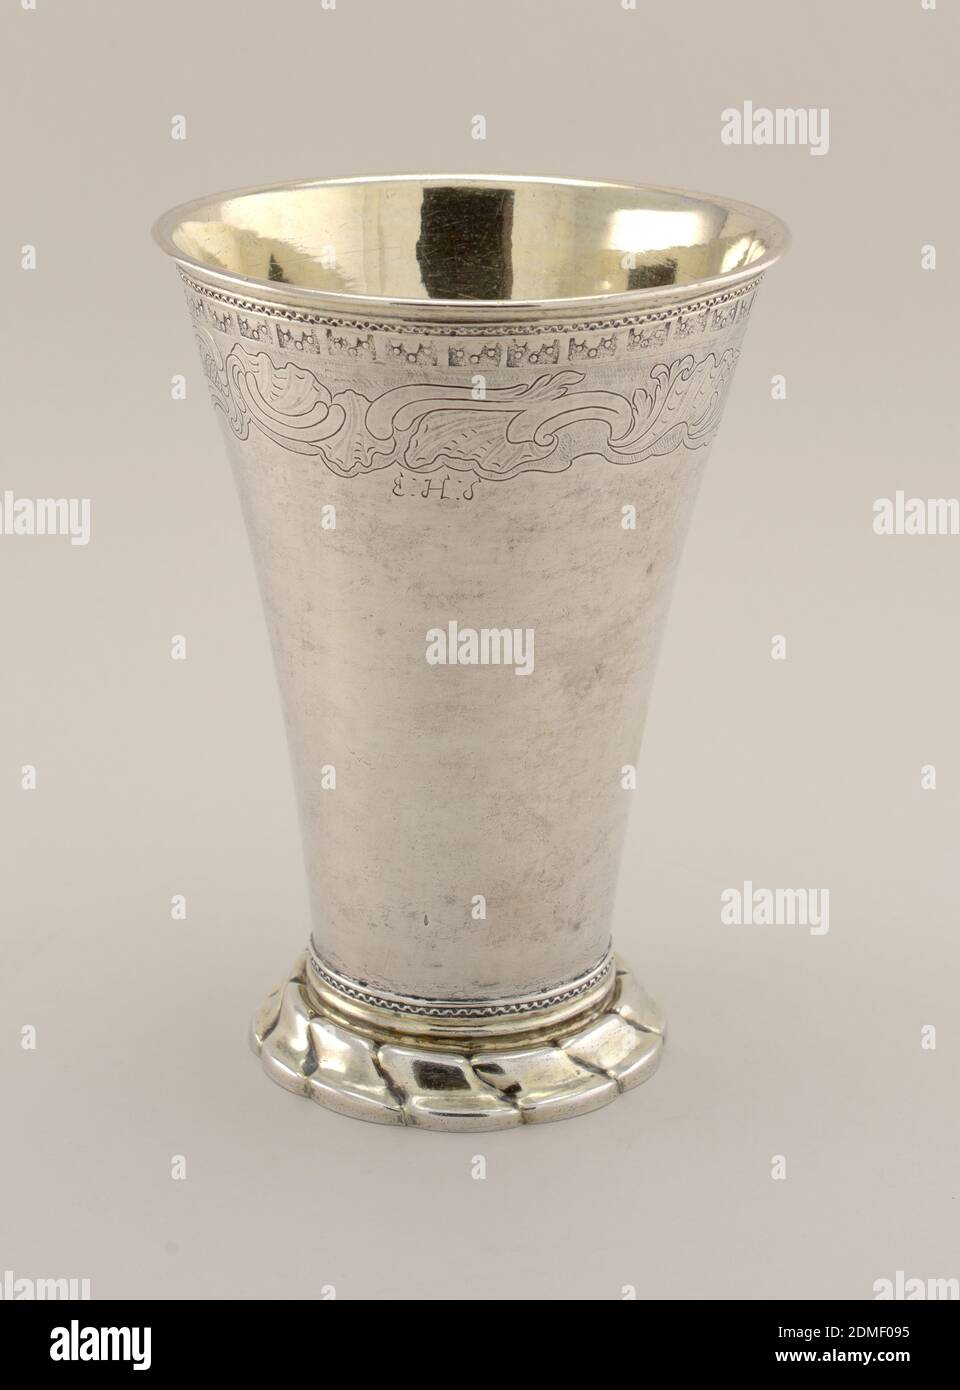 Beaker, silver, gold, Tall flaring body with punched lambrequin motif above engraved shell and scroll band and initials E.H.S. Wavy relief band at top and bottom. Flaring gadrooned foot, with traces of gilding. Interior gilded., Stockholm, Sweden, 1760, metalwork, Decorative Arts, beaker, beaker Stock Photo